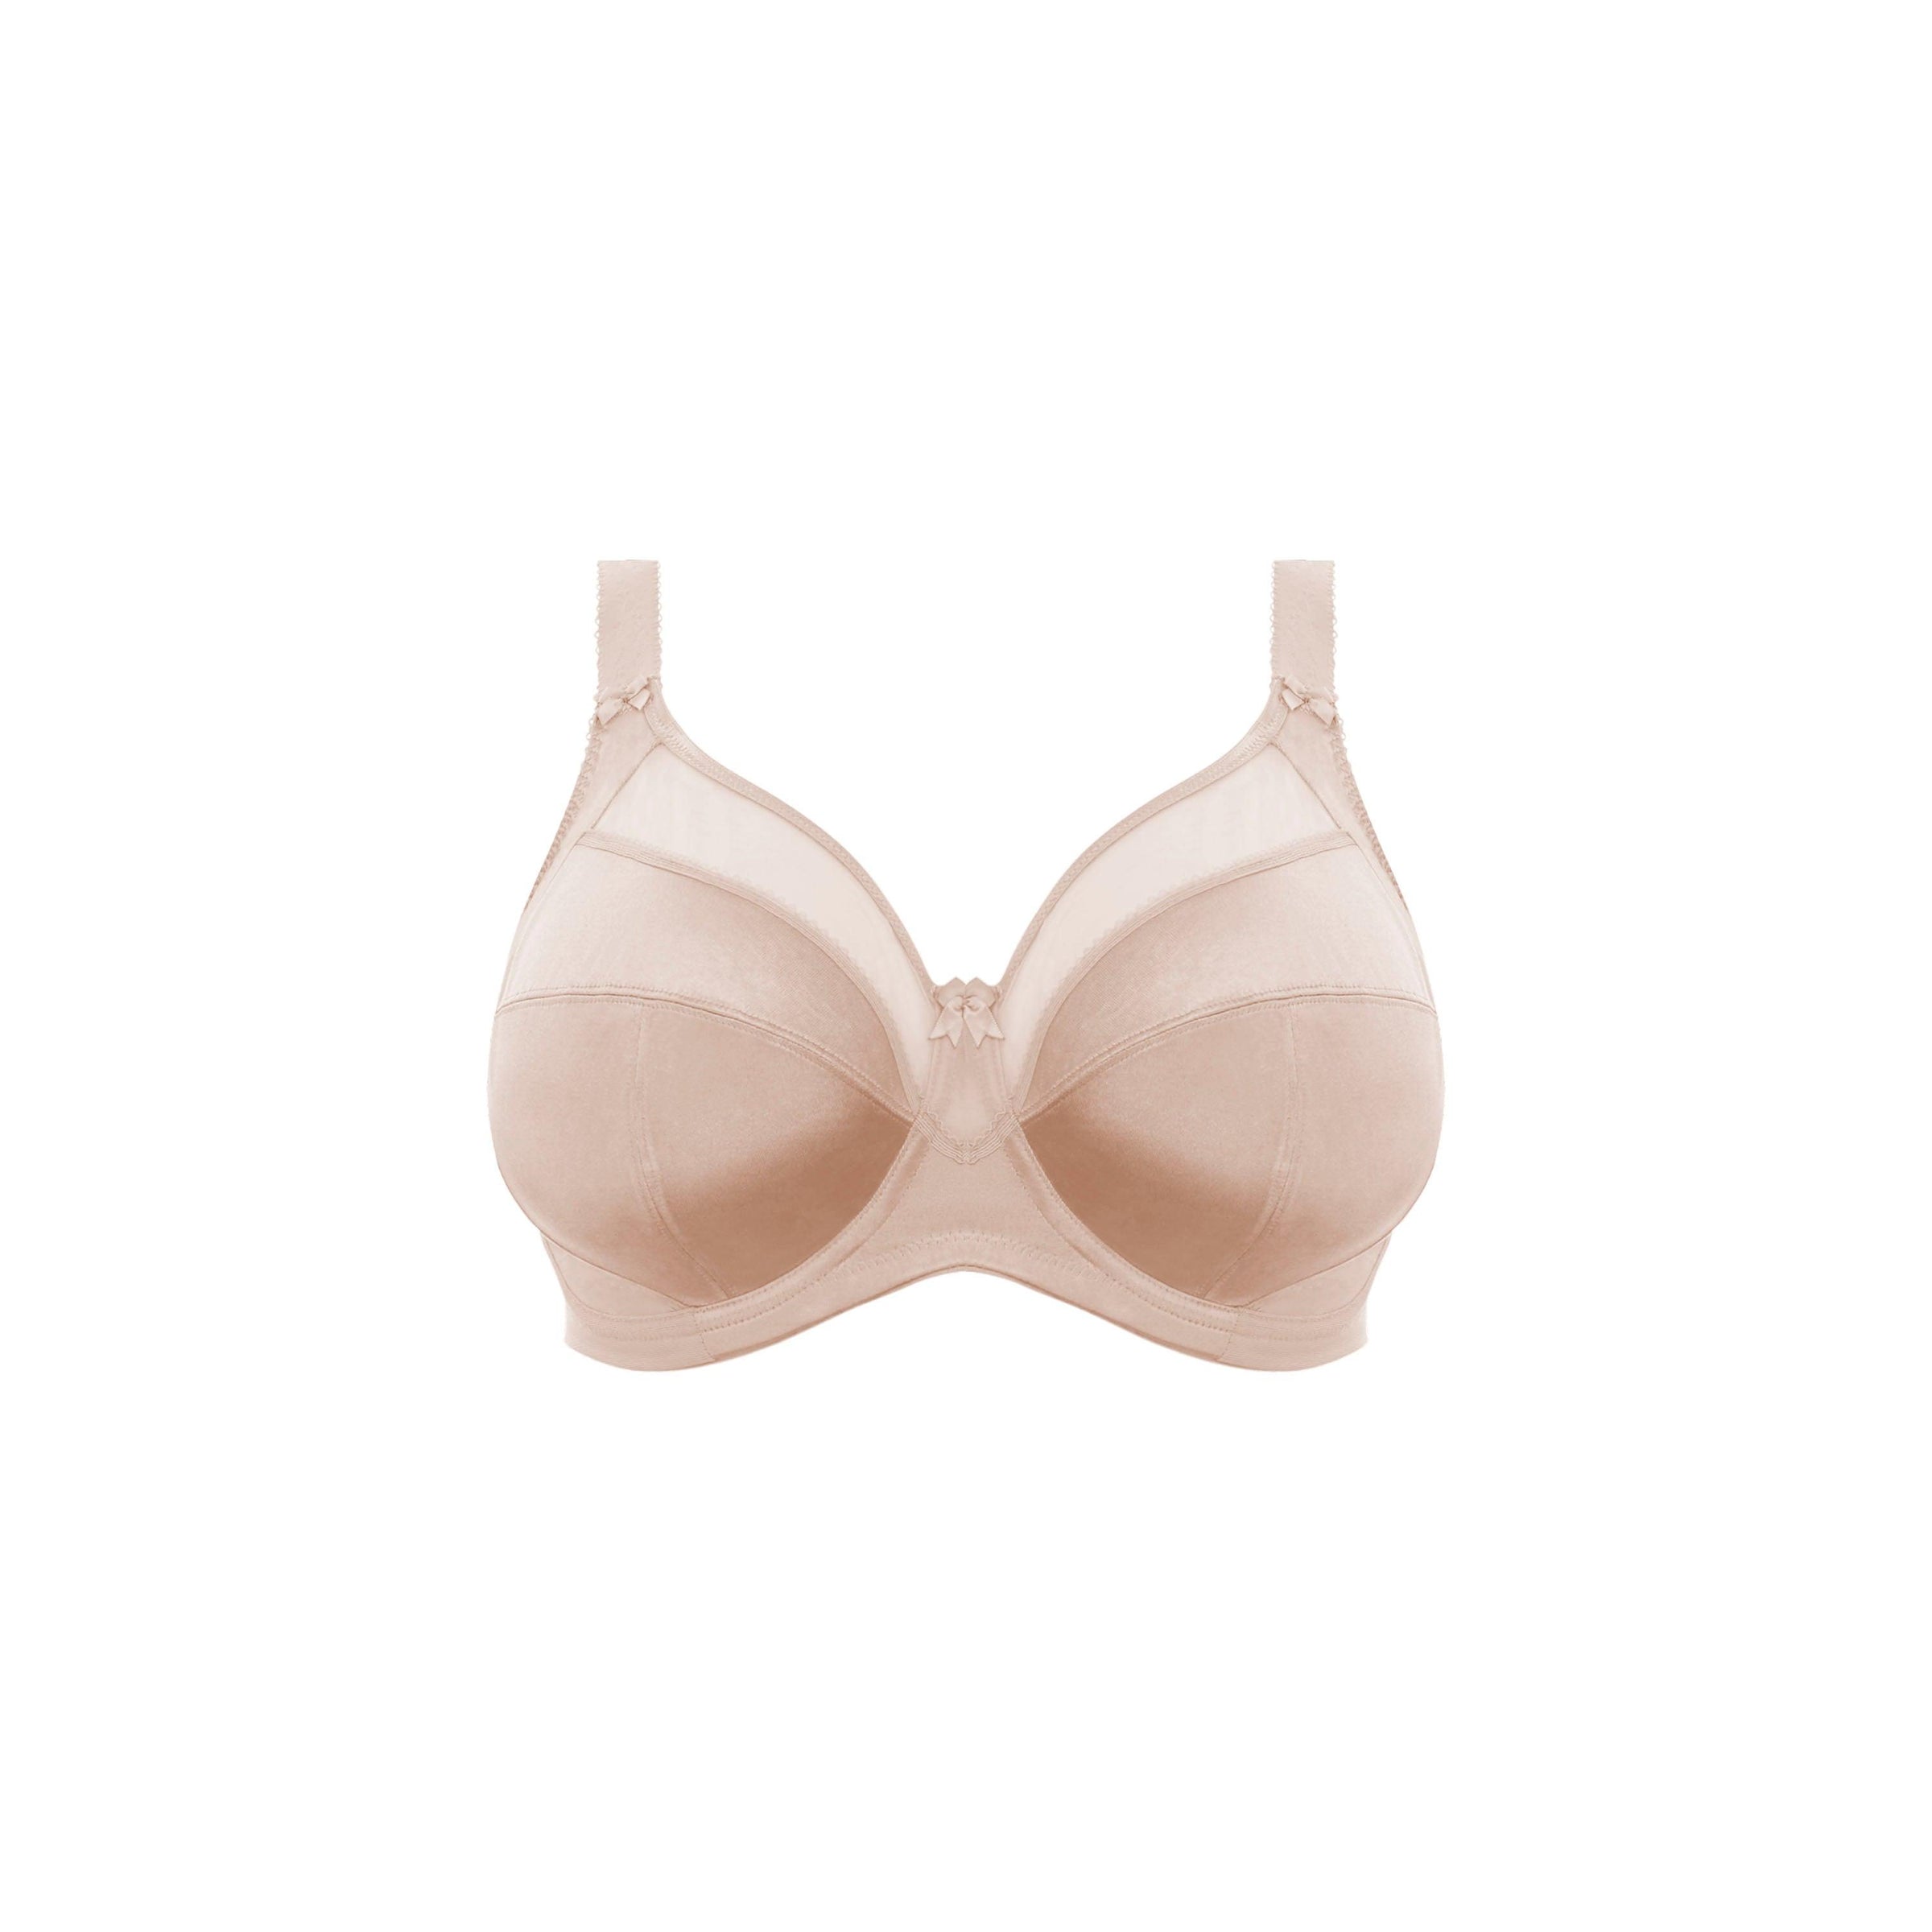 Goddess "Keira" Fawn Non Wired Bra (B-FF) - Lion's Lair Boutique - 36, 38, 40, 42, 44, 46, 48, 50, B, C, continuity, D, DD, E, F, FF, full cup, Goddess, Keira, lingerie, SFT, wireless - Goddess